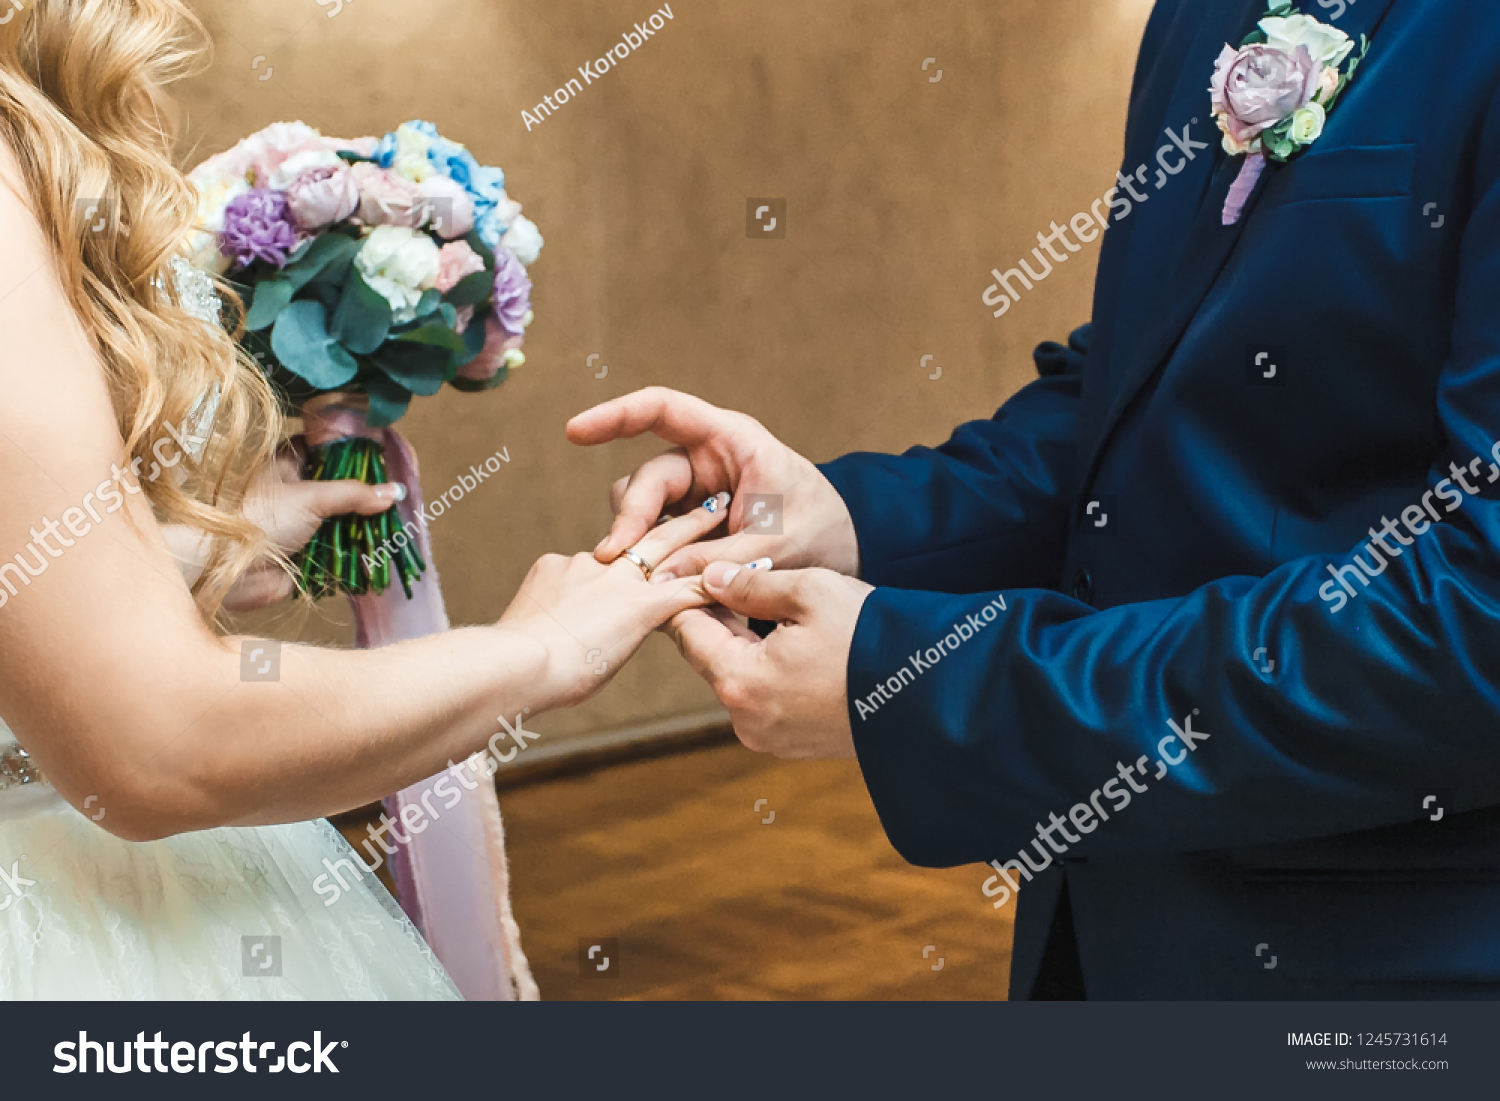 The groom wears a wedding ring to the bride. #1245731614